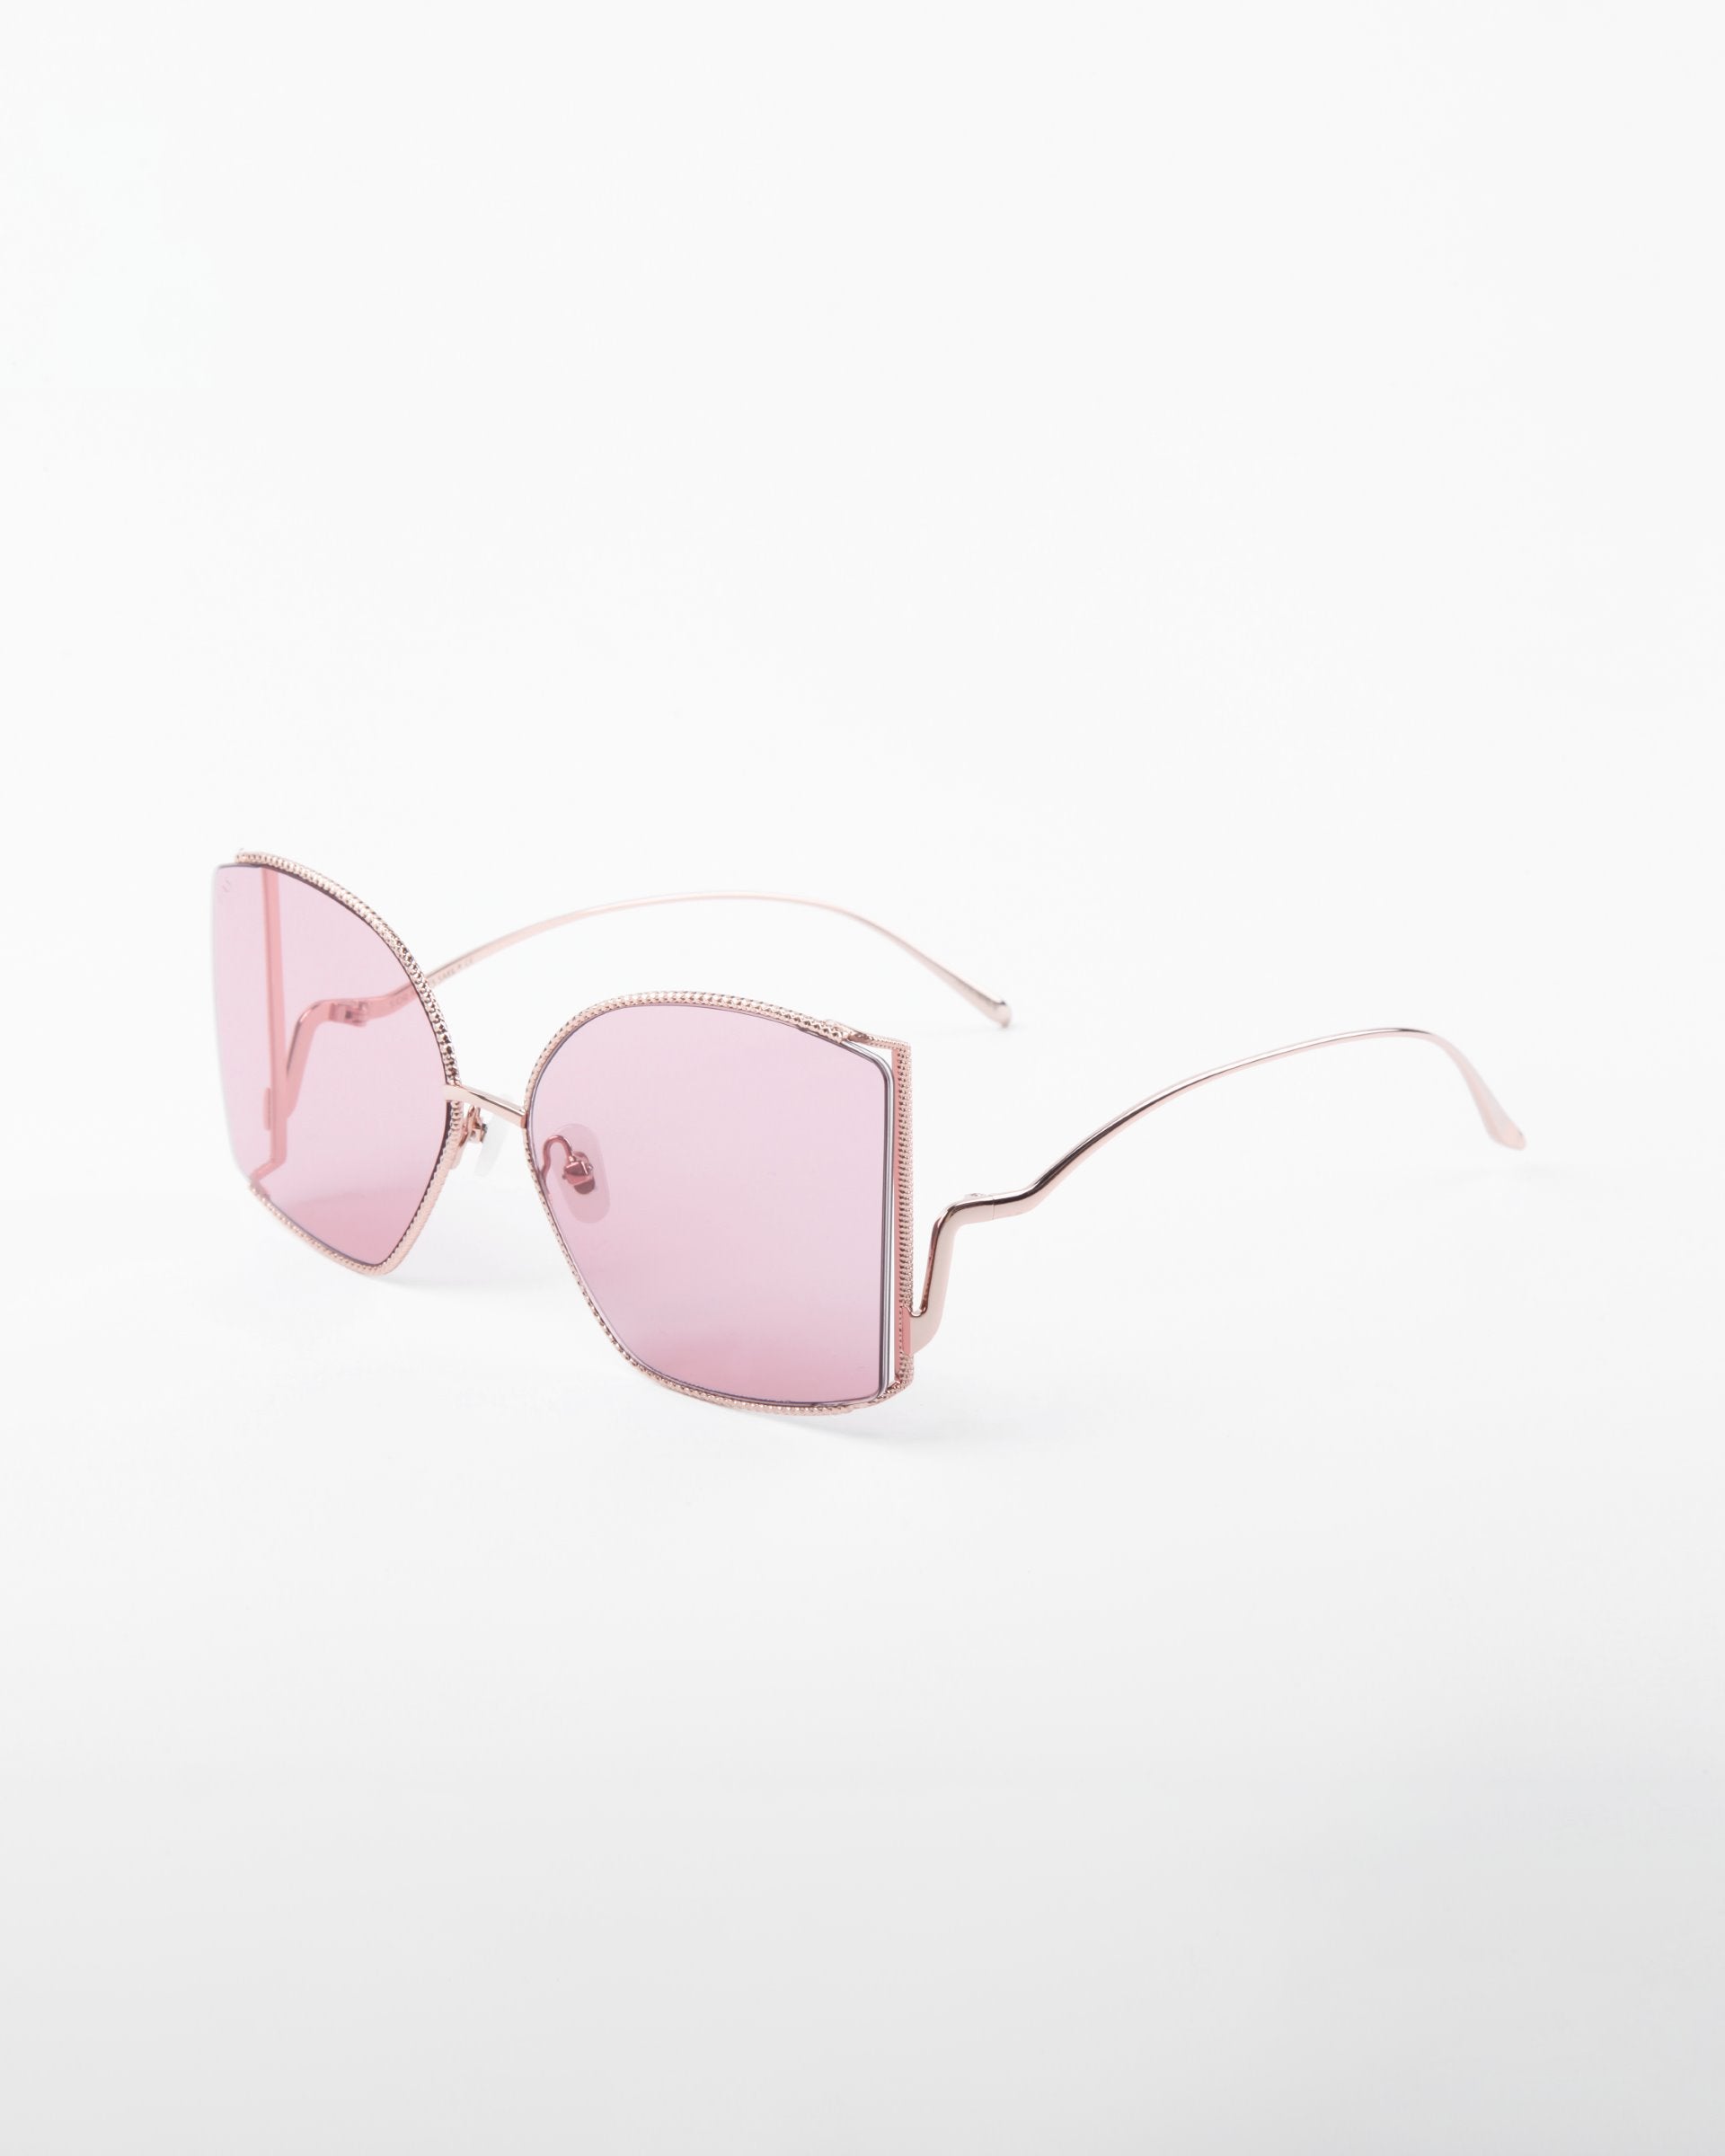 Sleek pair of Dixie sunglasses by For Art&#39;s Sake® with oversized square frames and light pink, shatter-resistant nylon lenses. The thin temples and rims feature delicate, handmade gold-plated frames. Offering UV protection, these sunglasses are set against a plain white background.